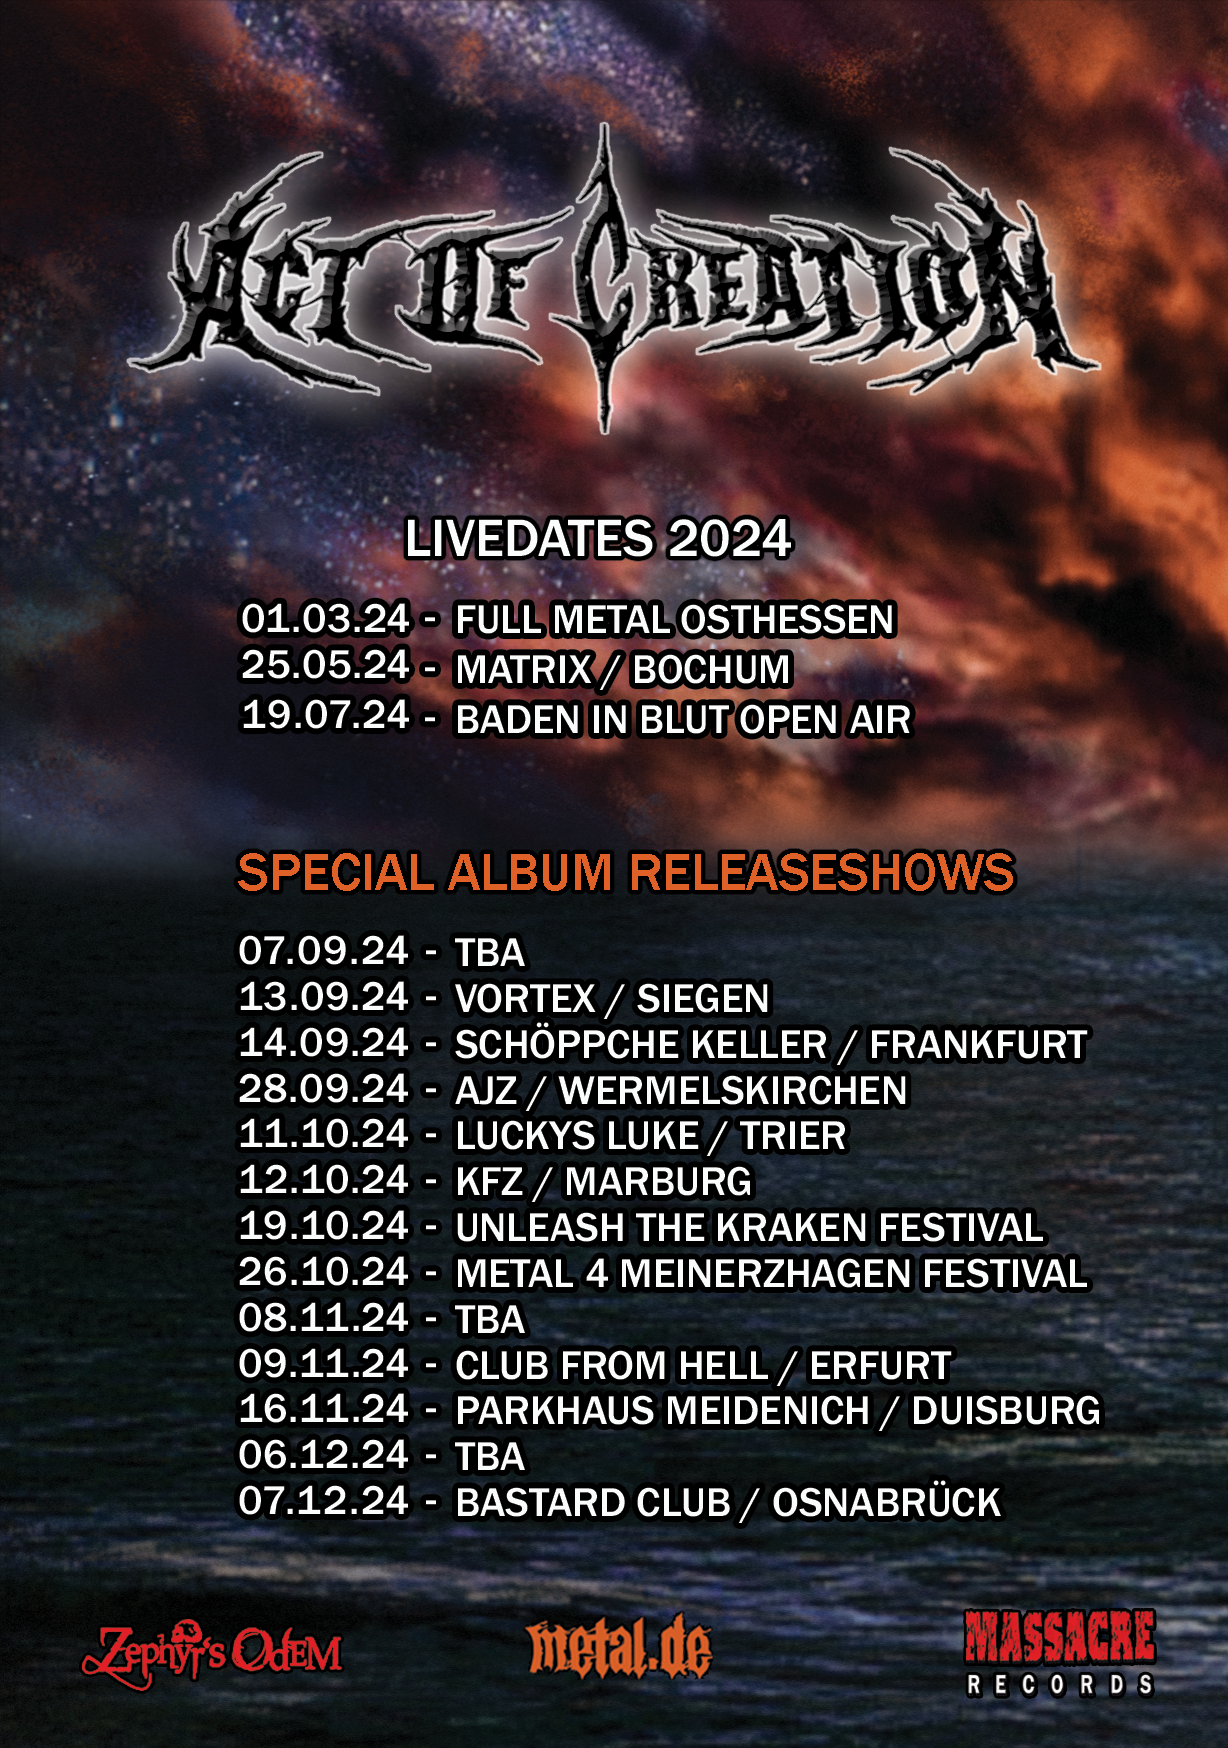 Act Of Creation Tour 2024